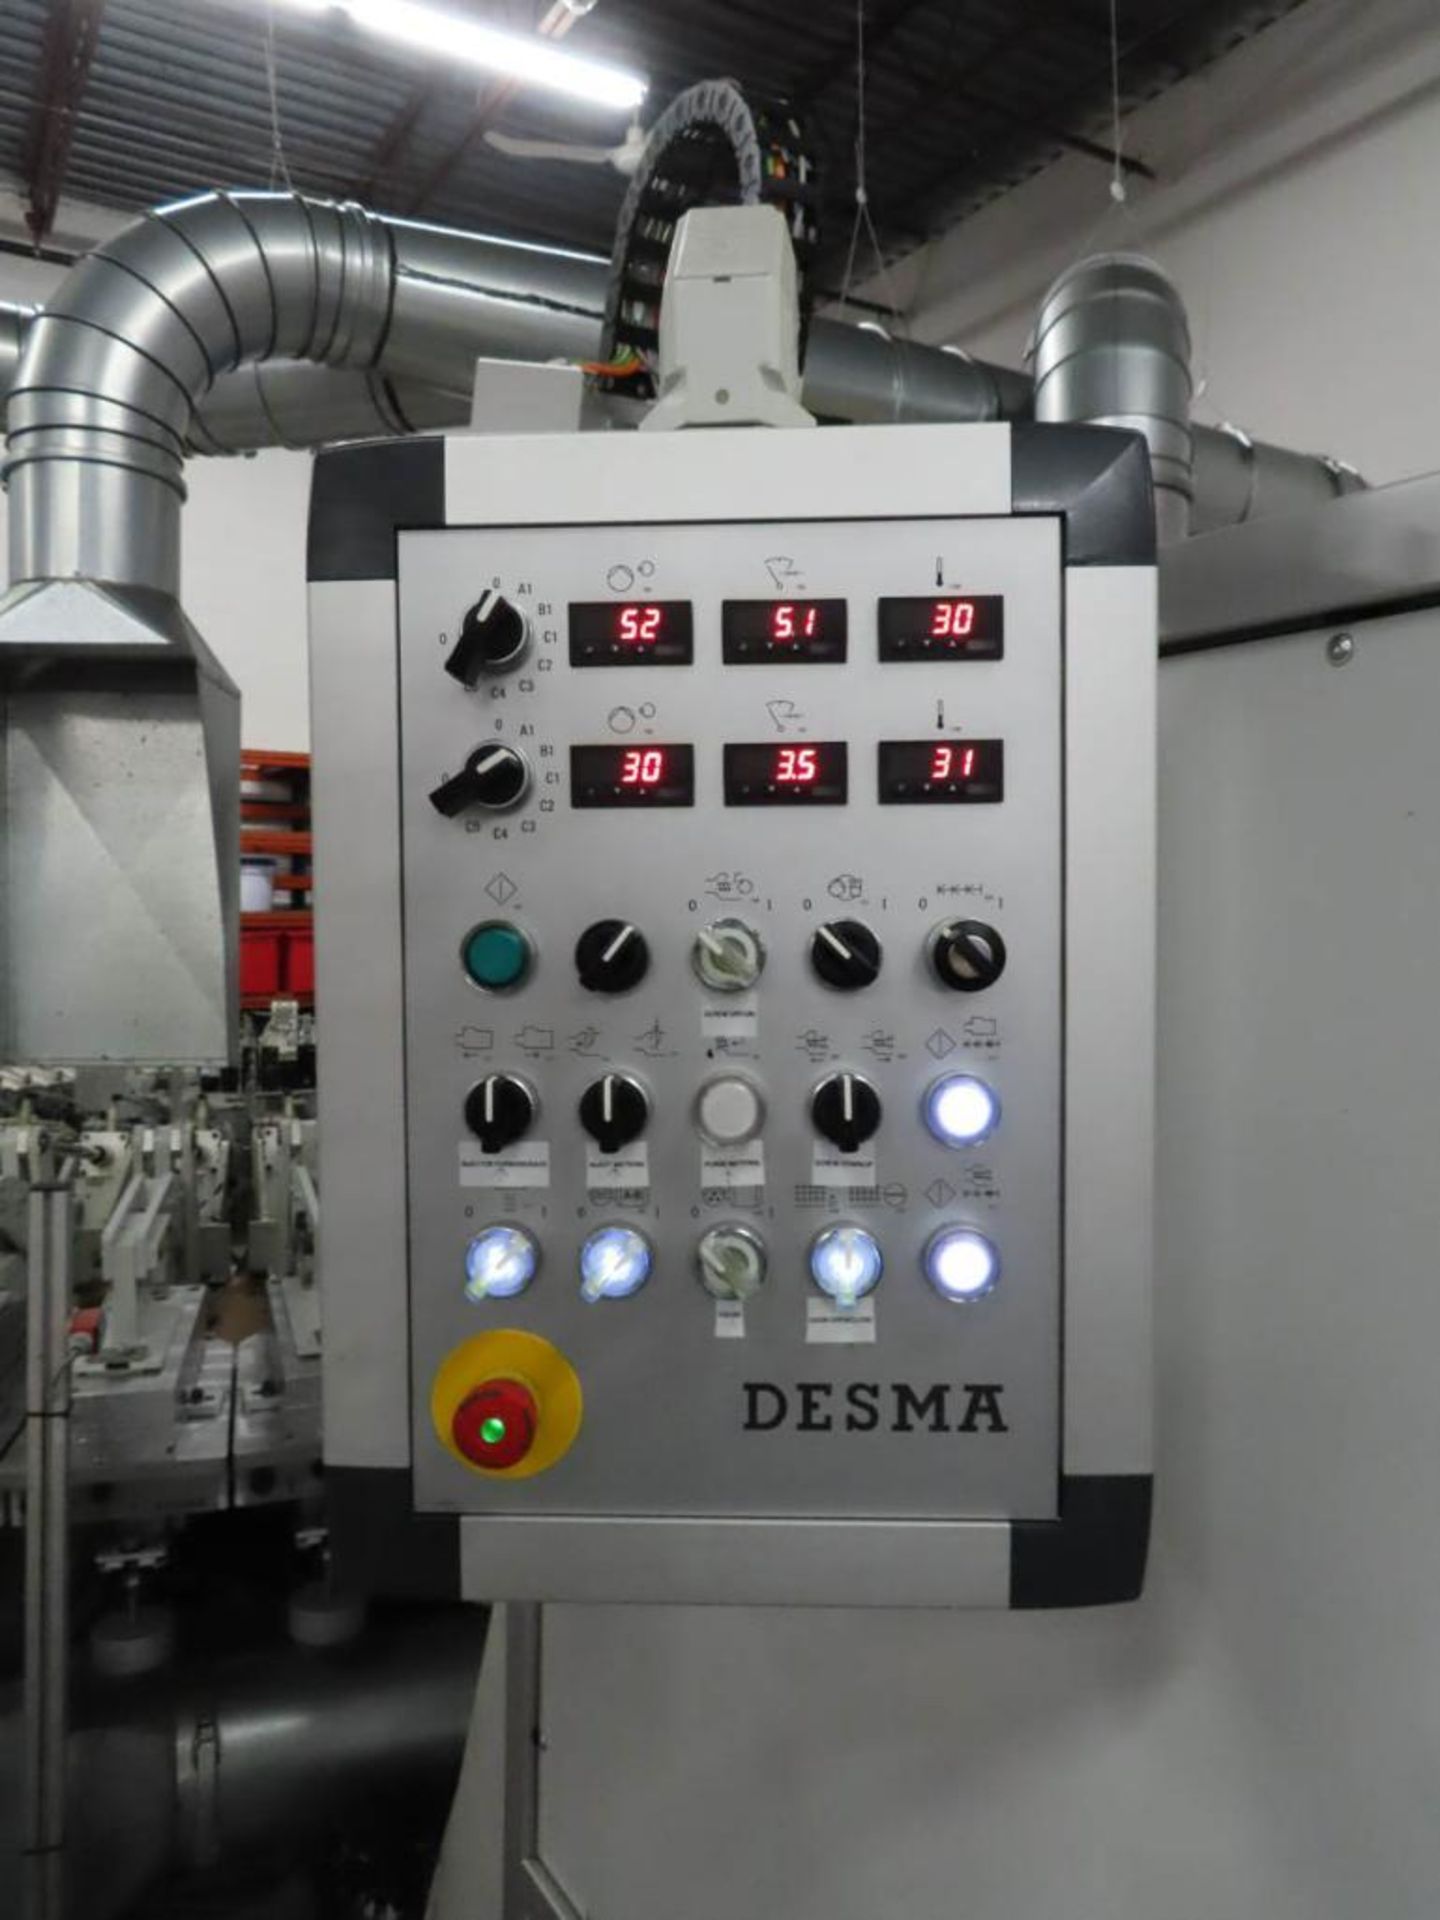 Desma, Mdl.S511/42-S, 42-Station Rotary Injection Molding Machine, 4-Color With Ability To Run With - Image 6 of 26